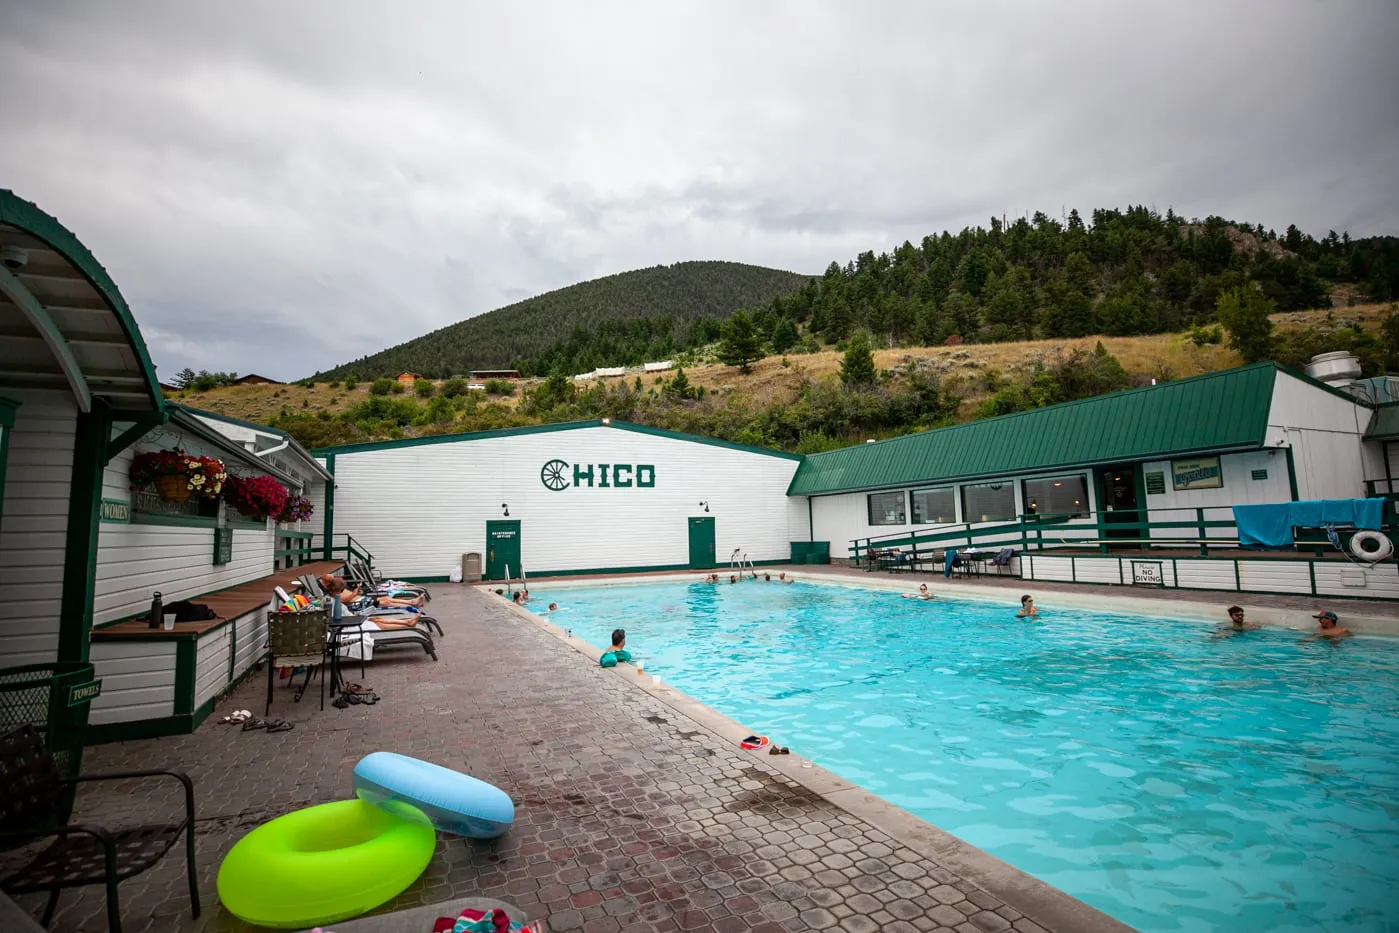 Chico Hot Springs Resort and Day Spa in Montana - Silly America